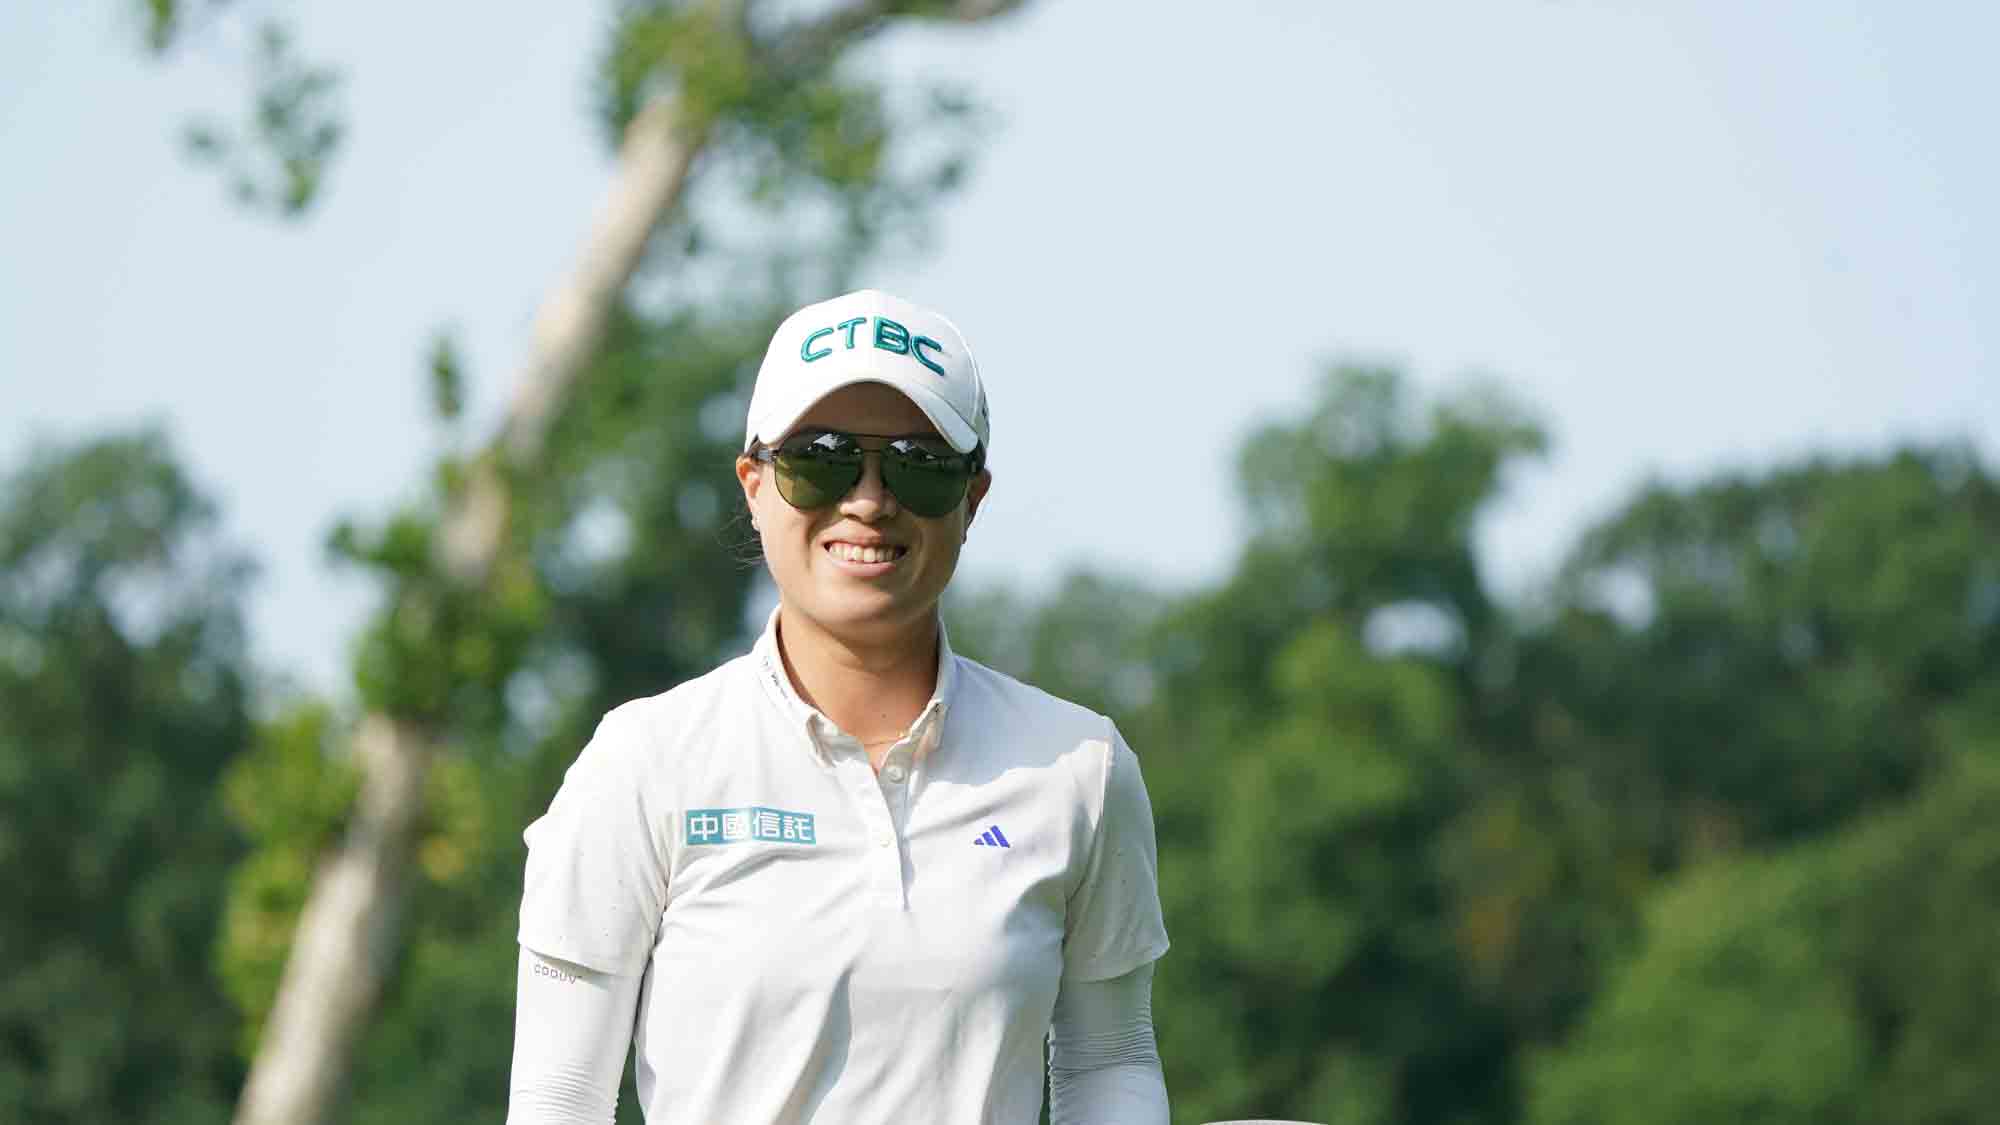 Ssu-Chia Cheng during the final round of the Hartford Healthcare Women's Championship